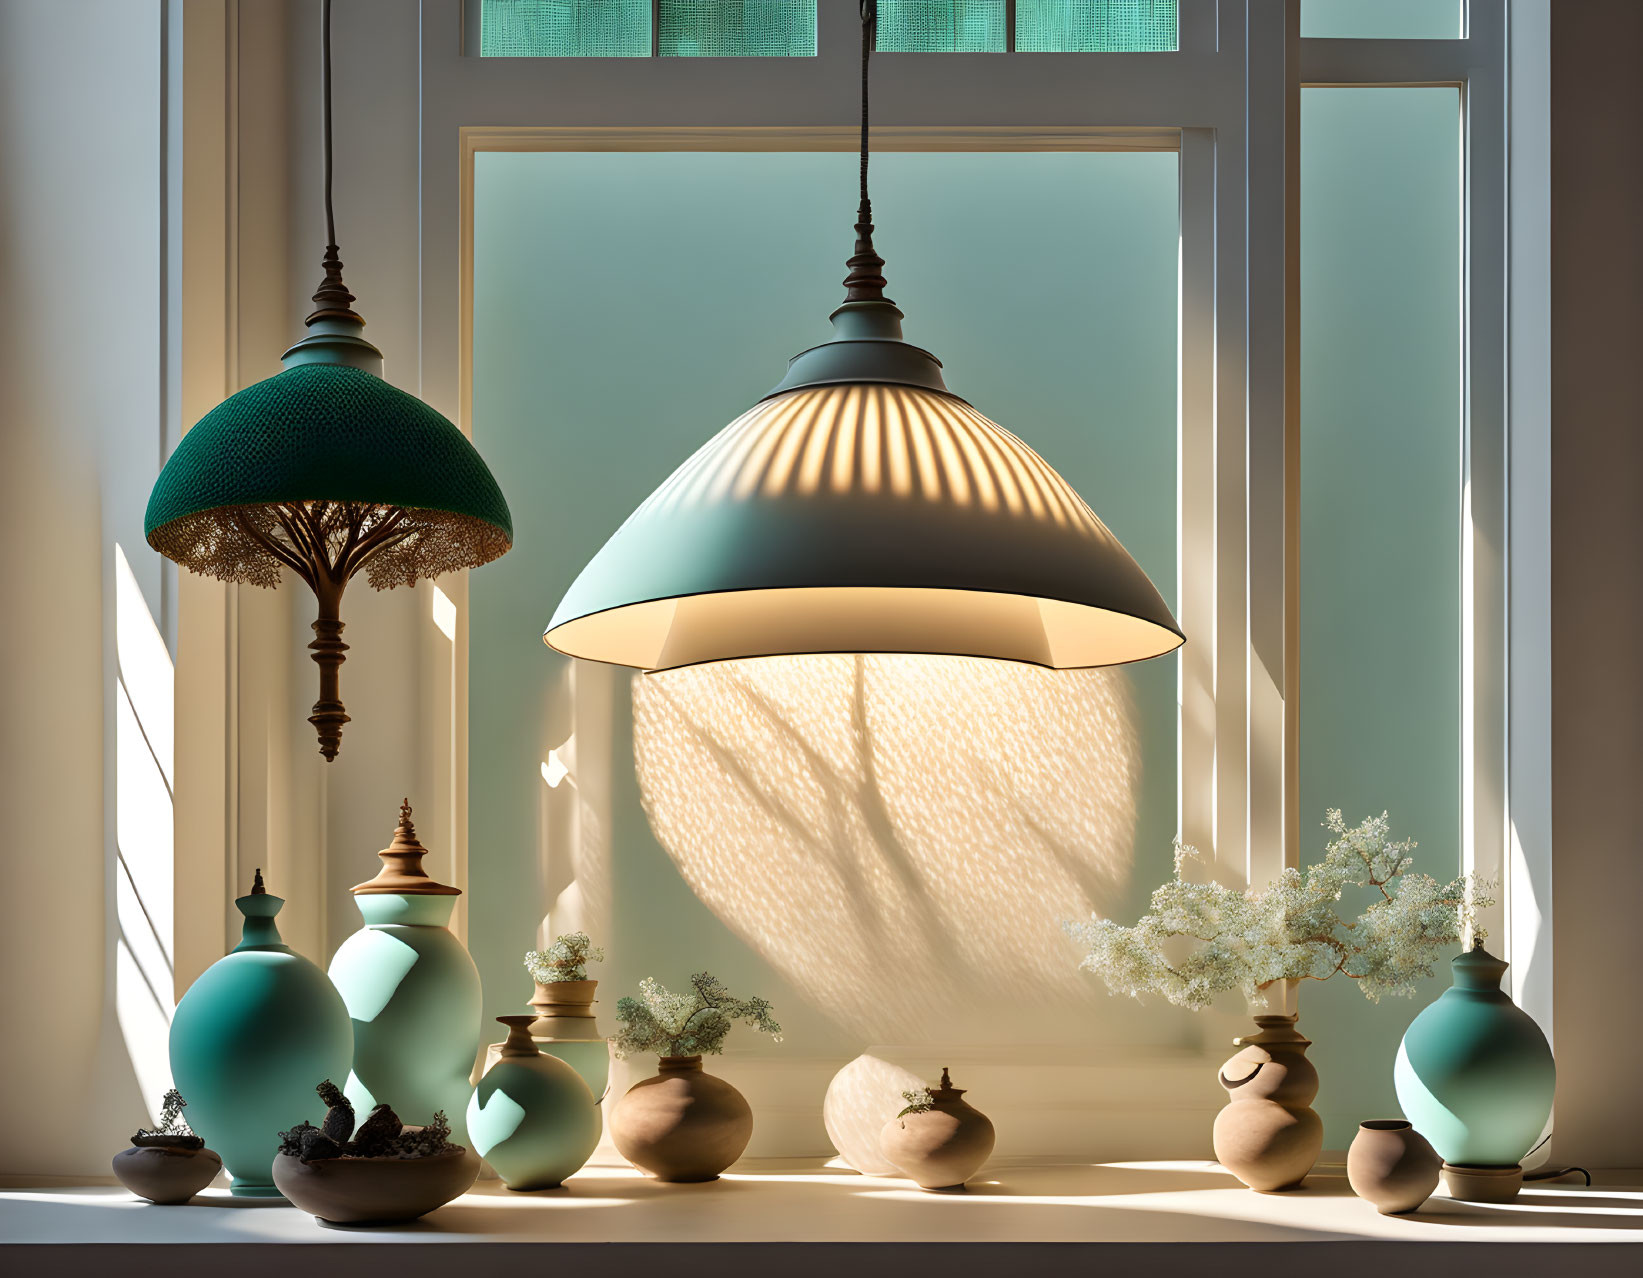 Elegant turquoise vases with white flowers under sunlight and hanging lamps